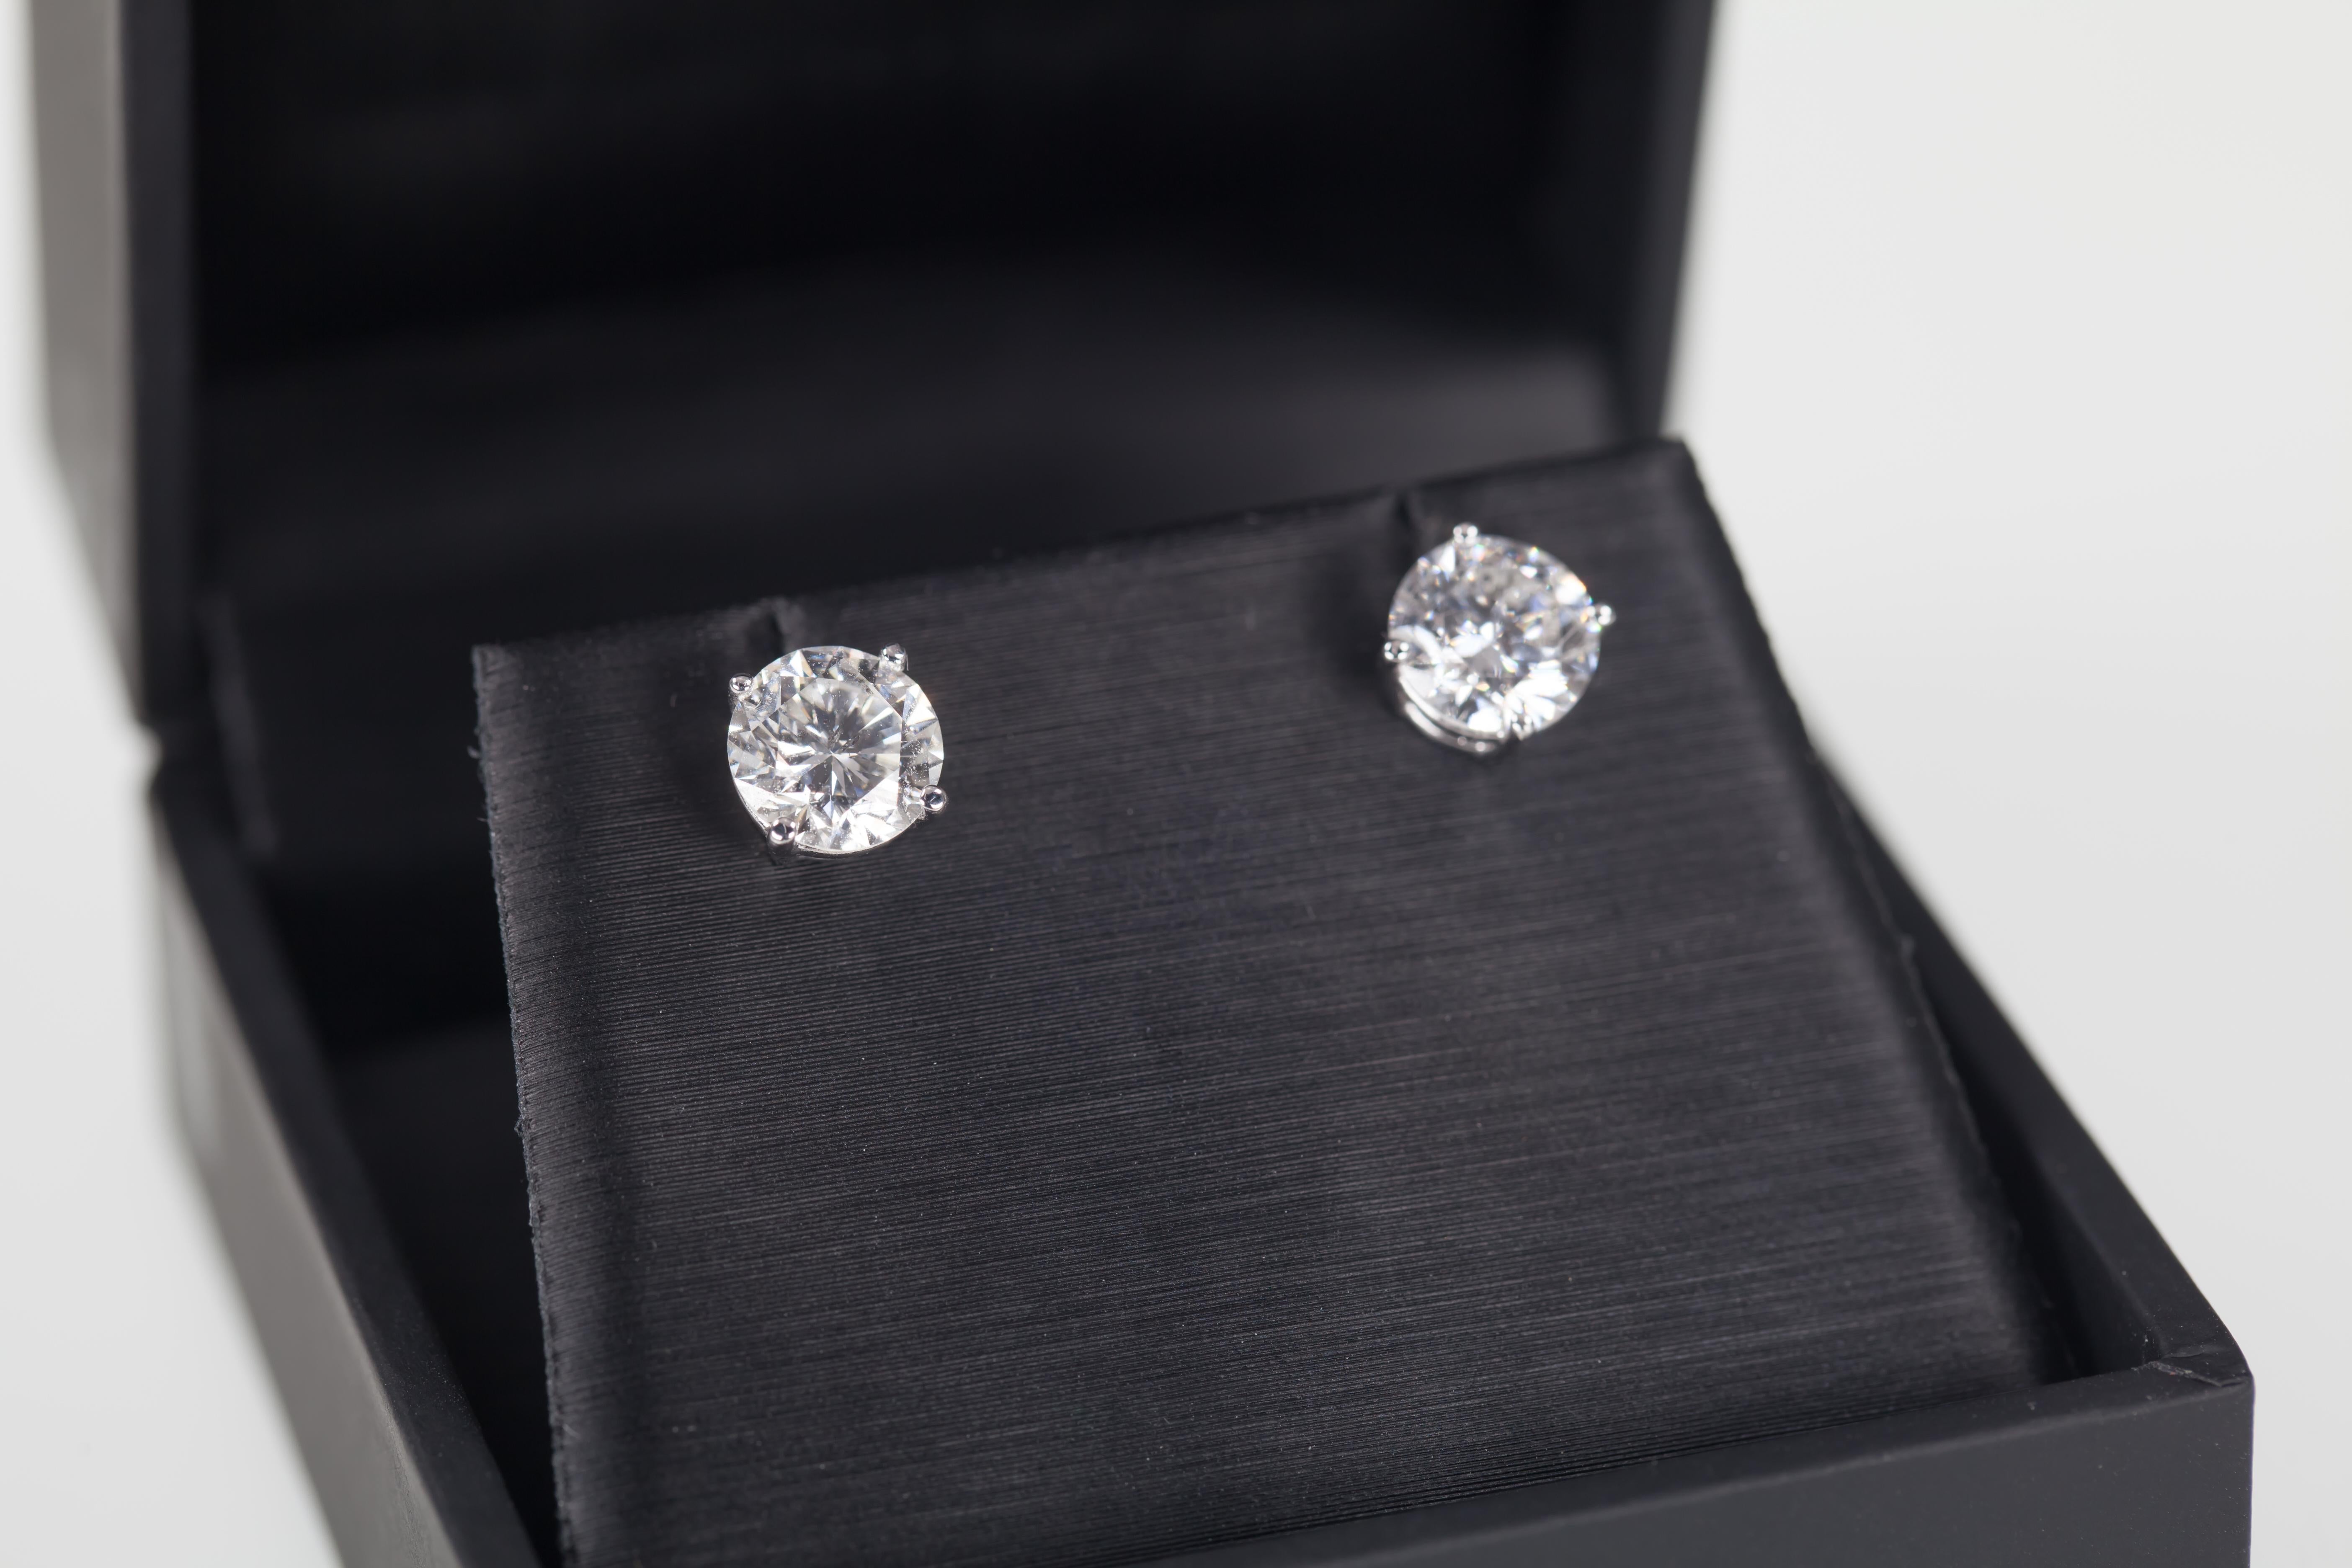 Beautiful Round Diamond Stud Earrings
Feature two diamonds totaling 2.25 cts
Color = H
Clarity = SI3
Dimensions of one stone: 6.7 mm x 4.17 mm
Dimensions of second stone: 6.59 mm x 3.99 mm
14k White Gold Screwback posts
Beautiful Gift!